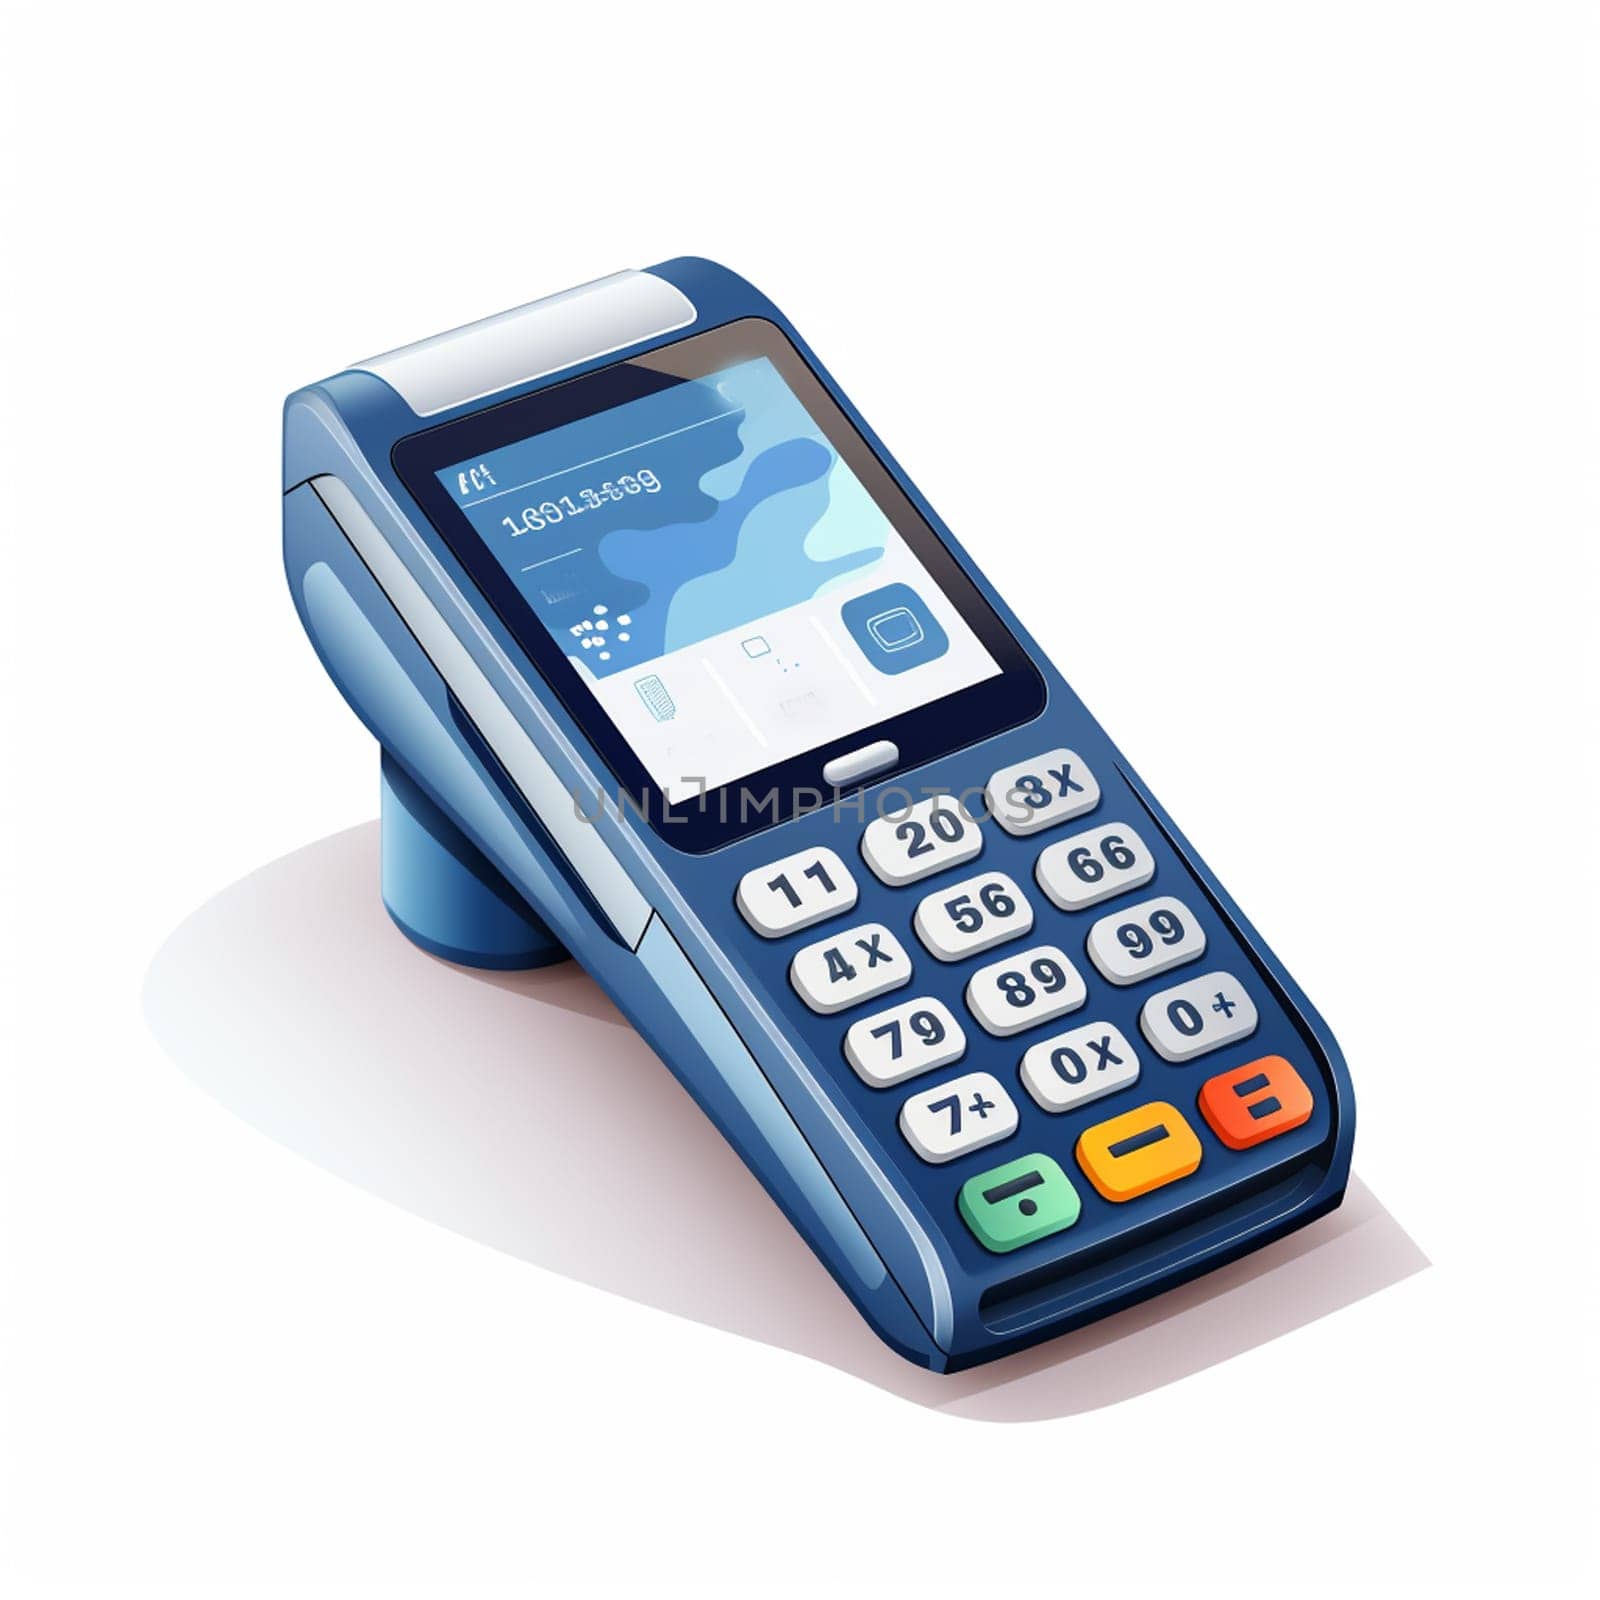 POS Payment GPRS Terminal, isolated on white by Andelov13